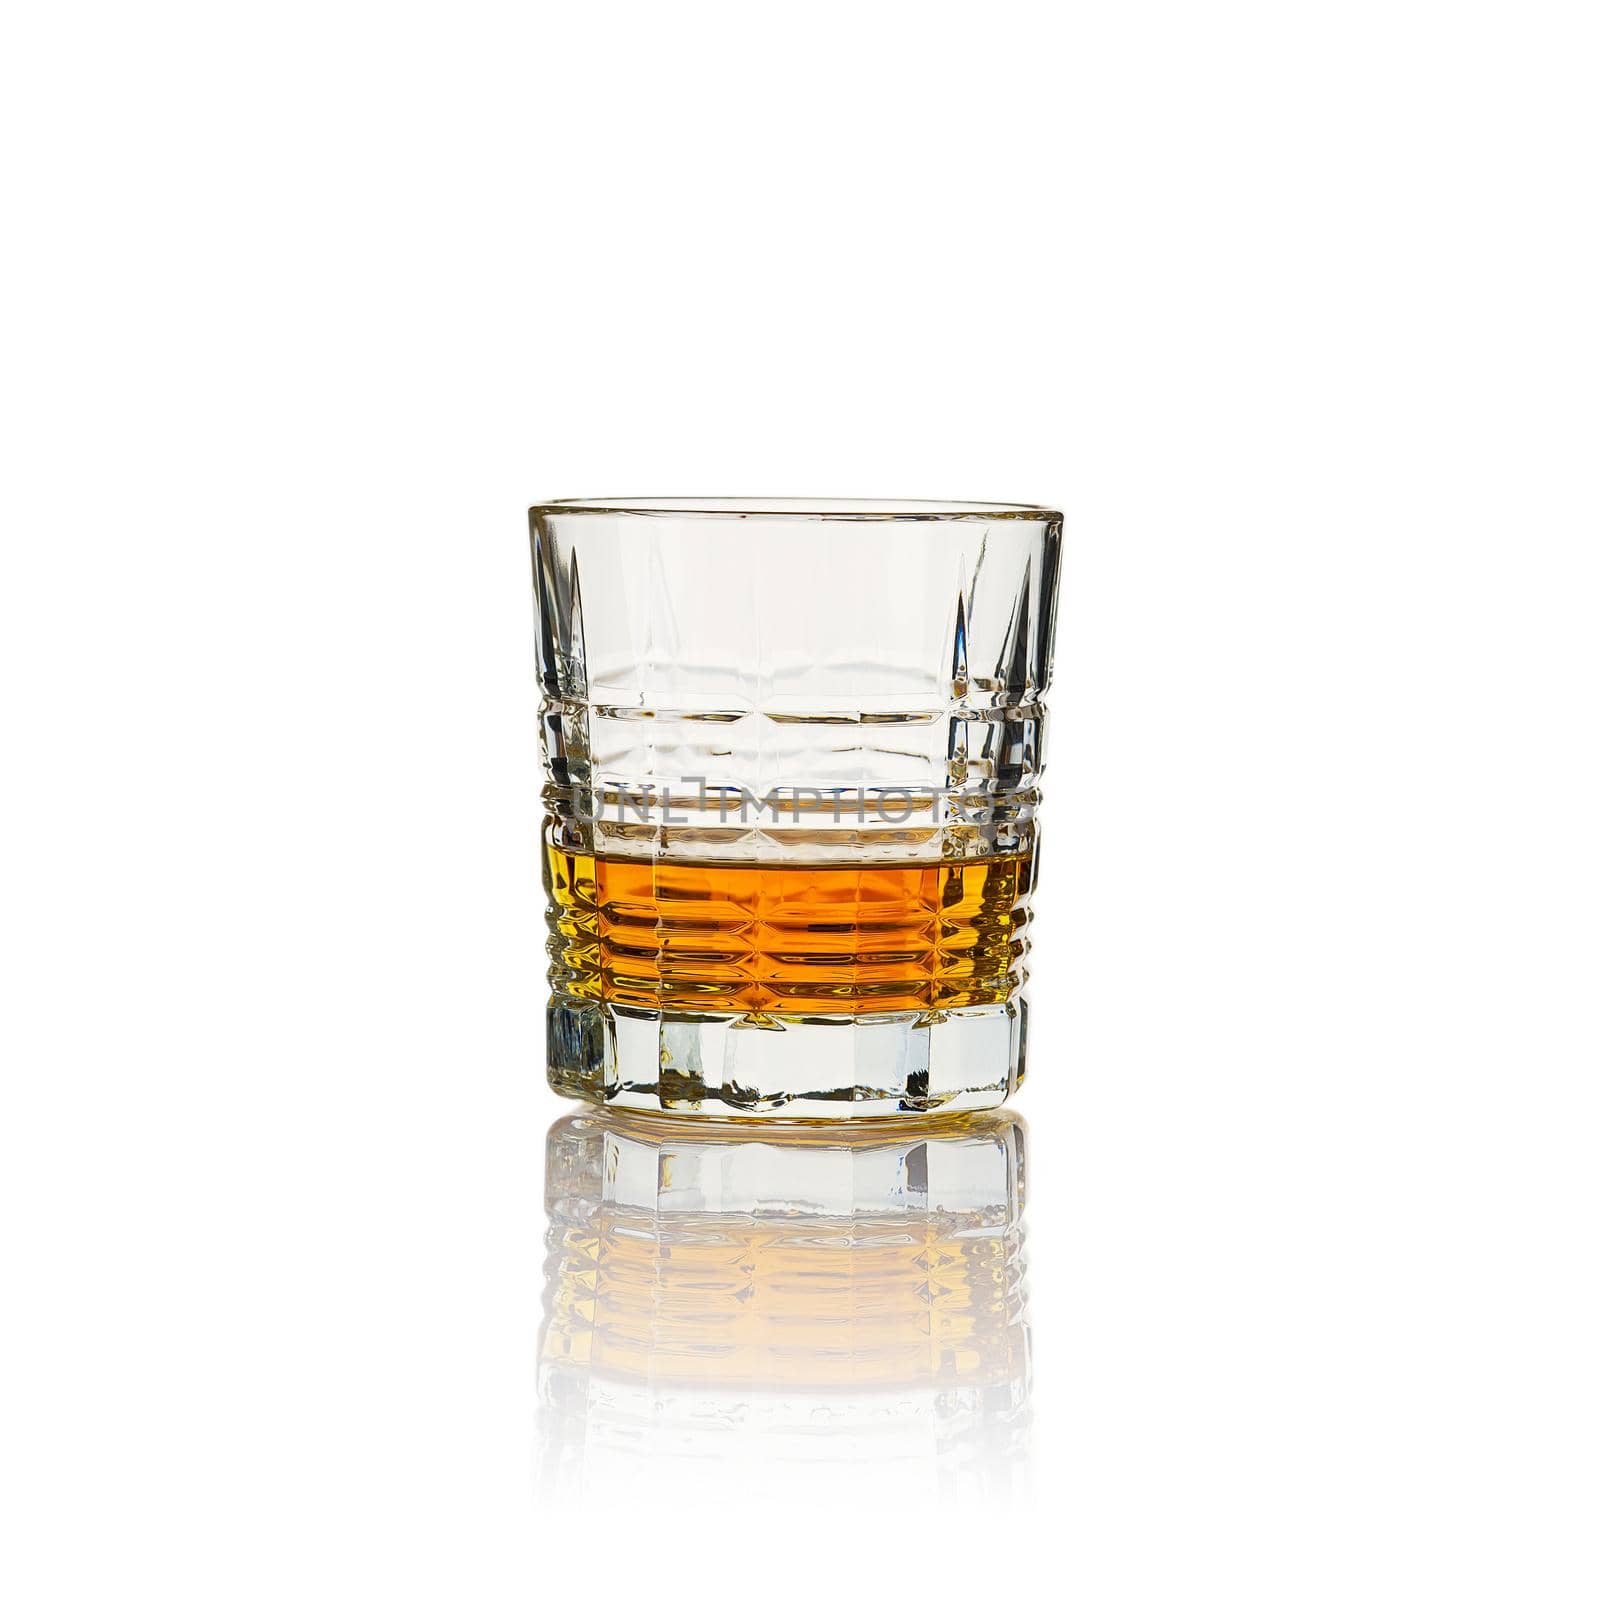 Glass of whisky - without ice and reflection, studio shot. Isolated on white